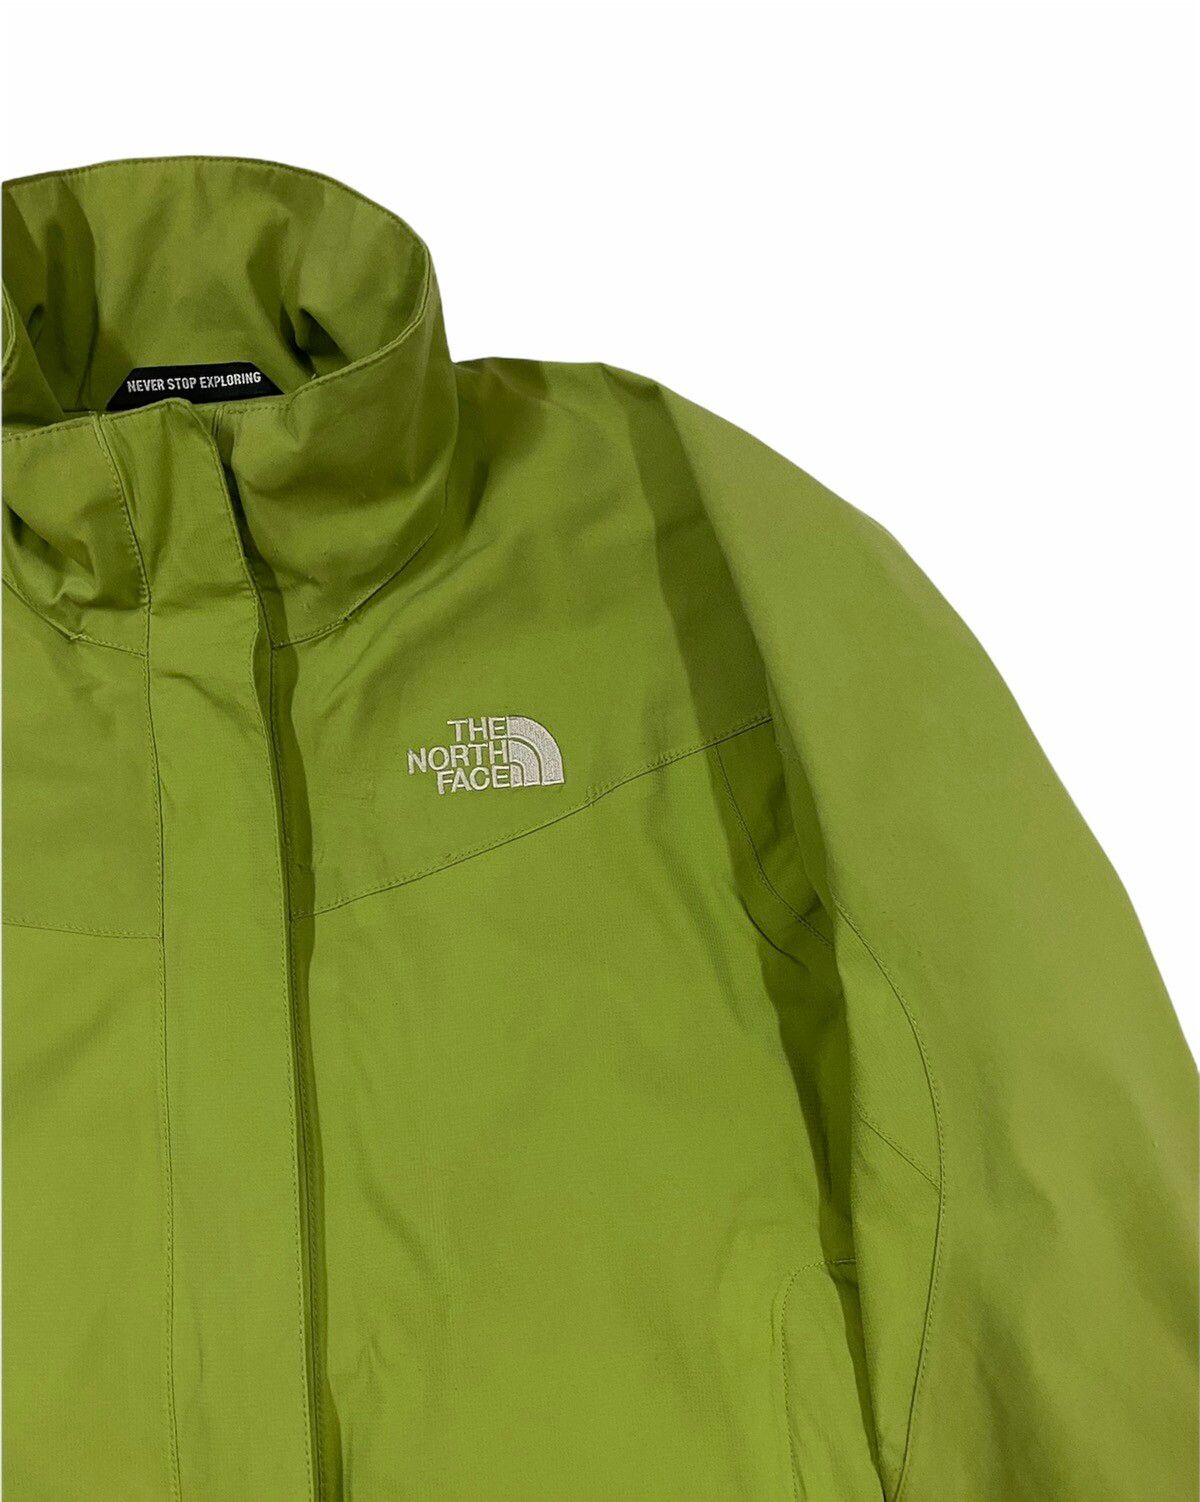 The North Face Vintage Gore Tex XCR Summit Series Jacket S - 7